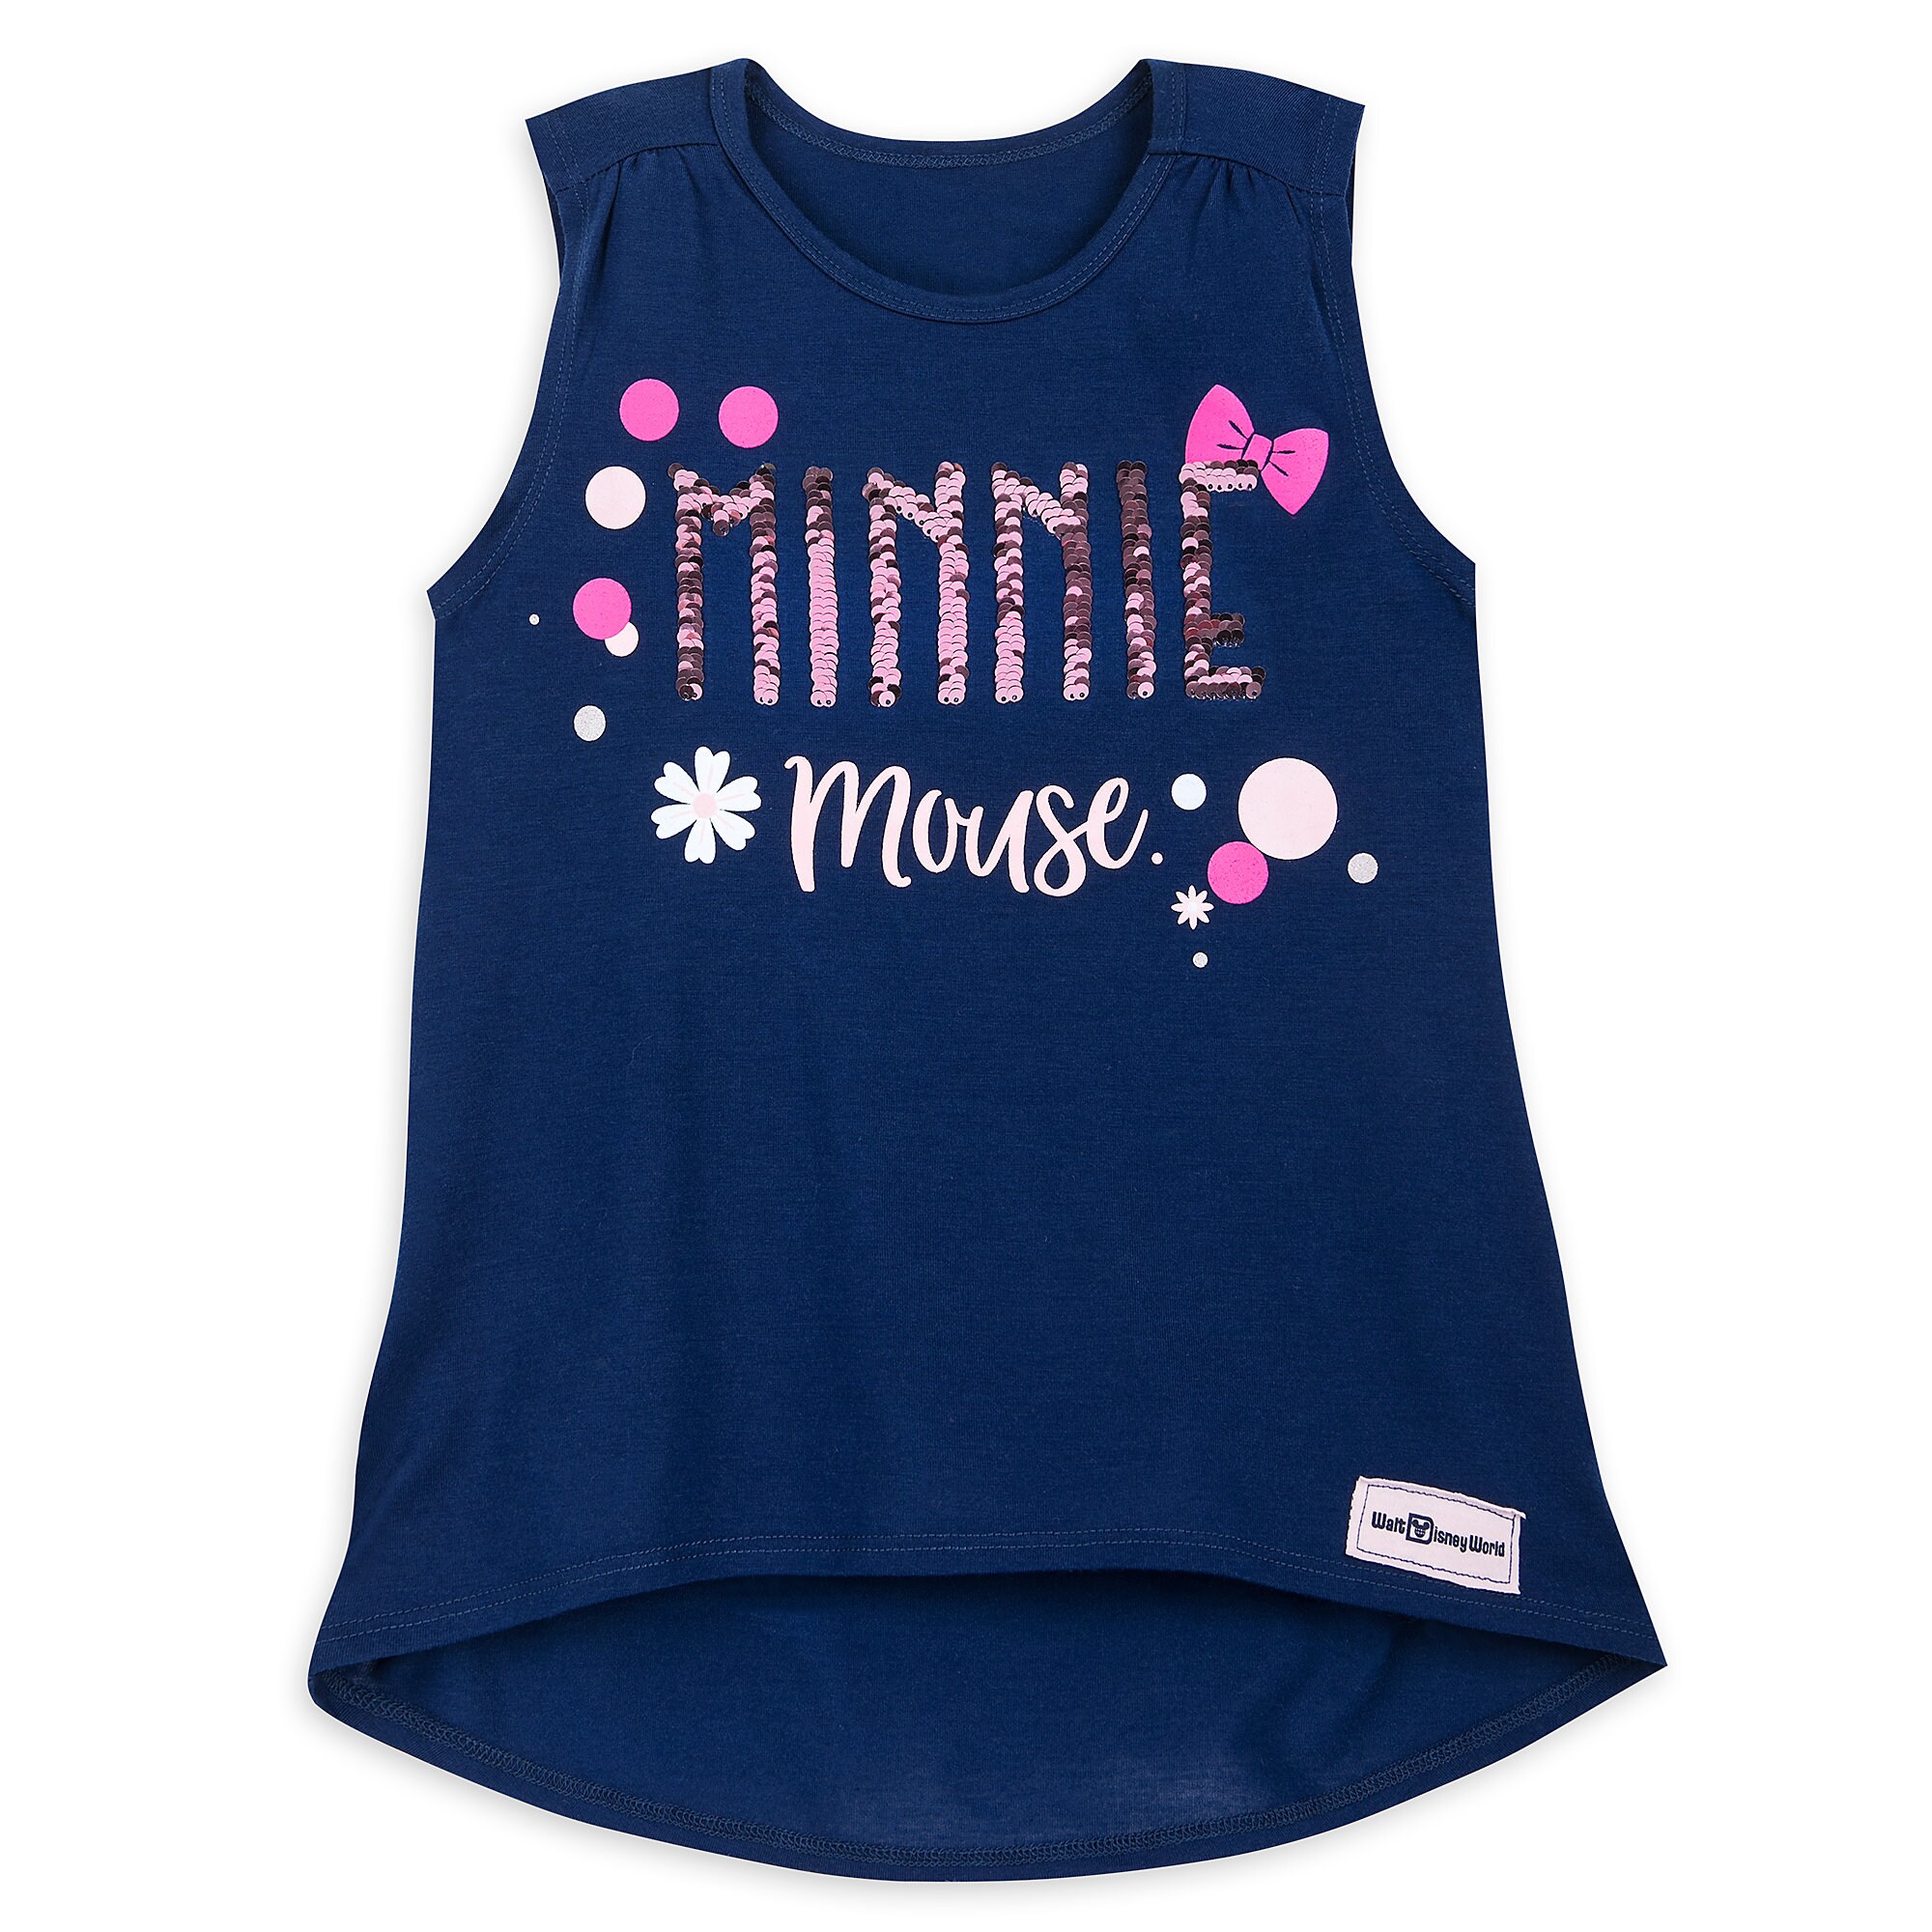 Minnie Mouse Reversible Sequin Tank Top for Girls - Walt Disney World